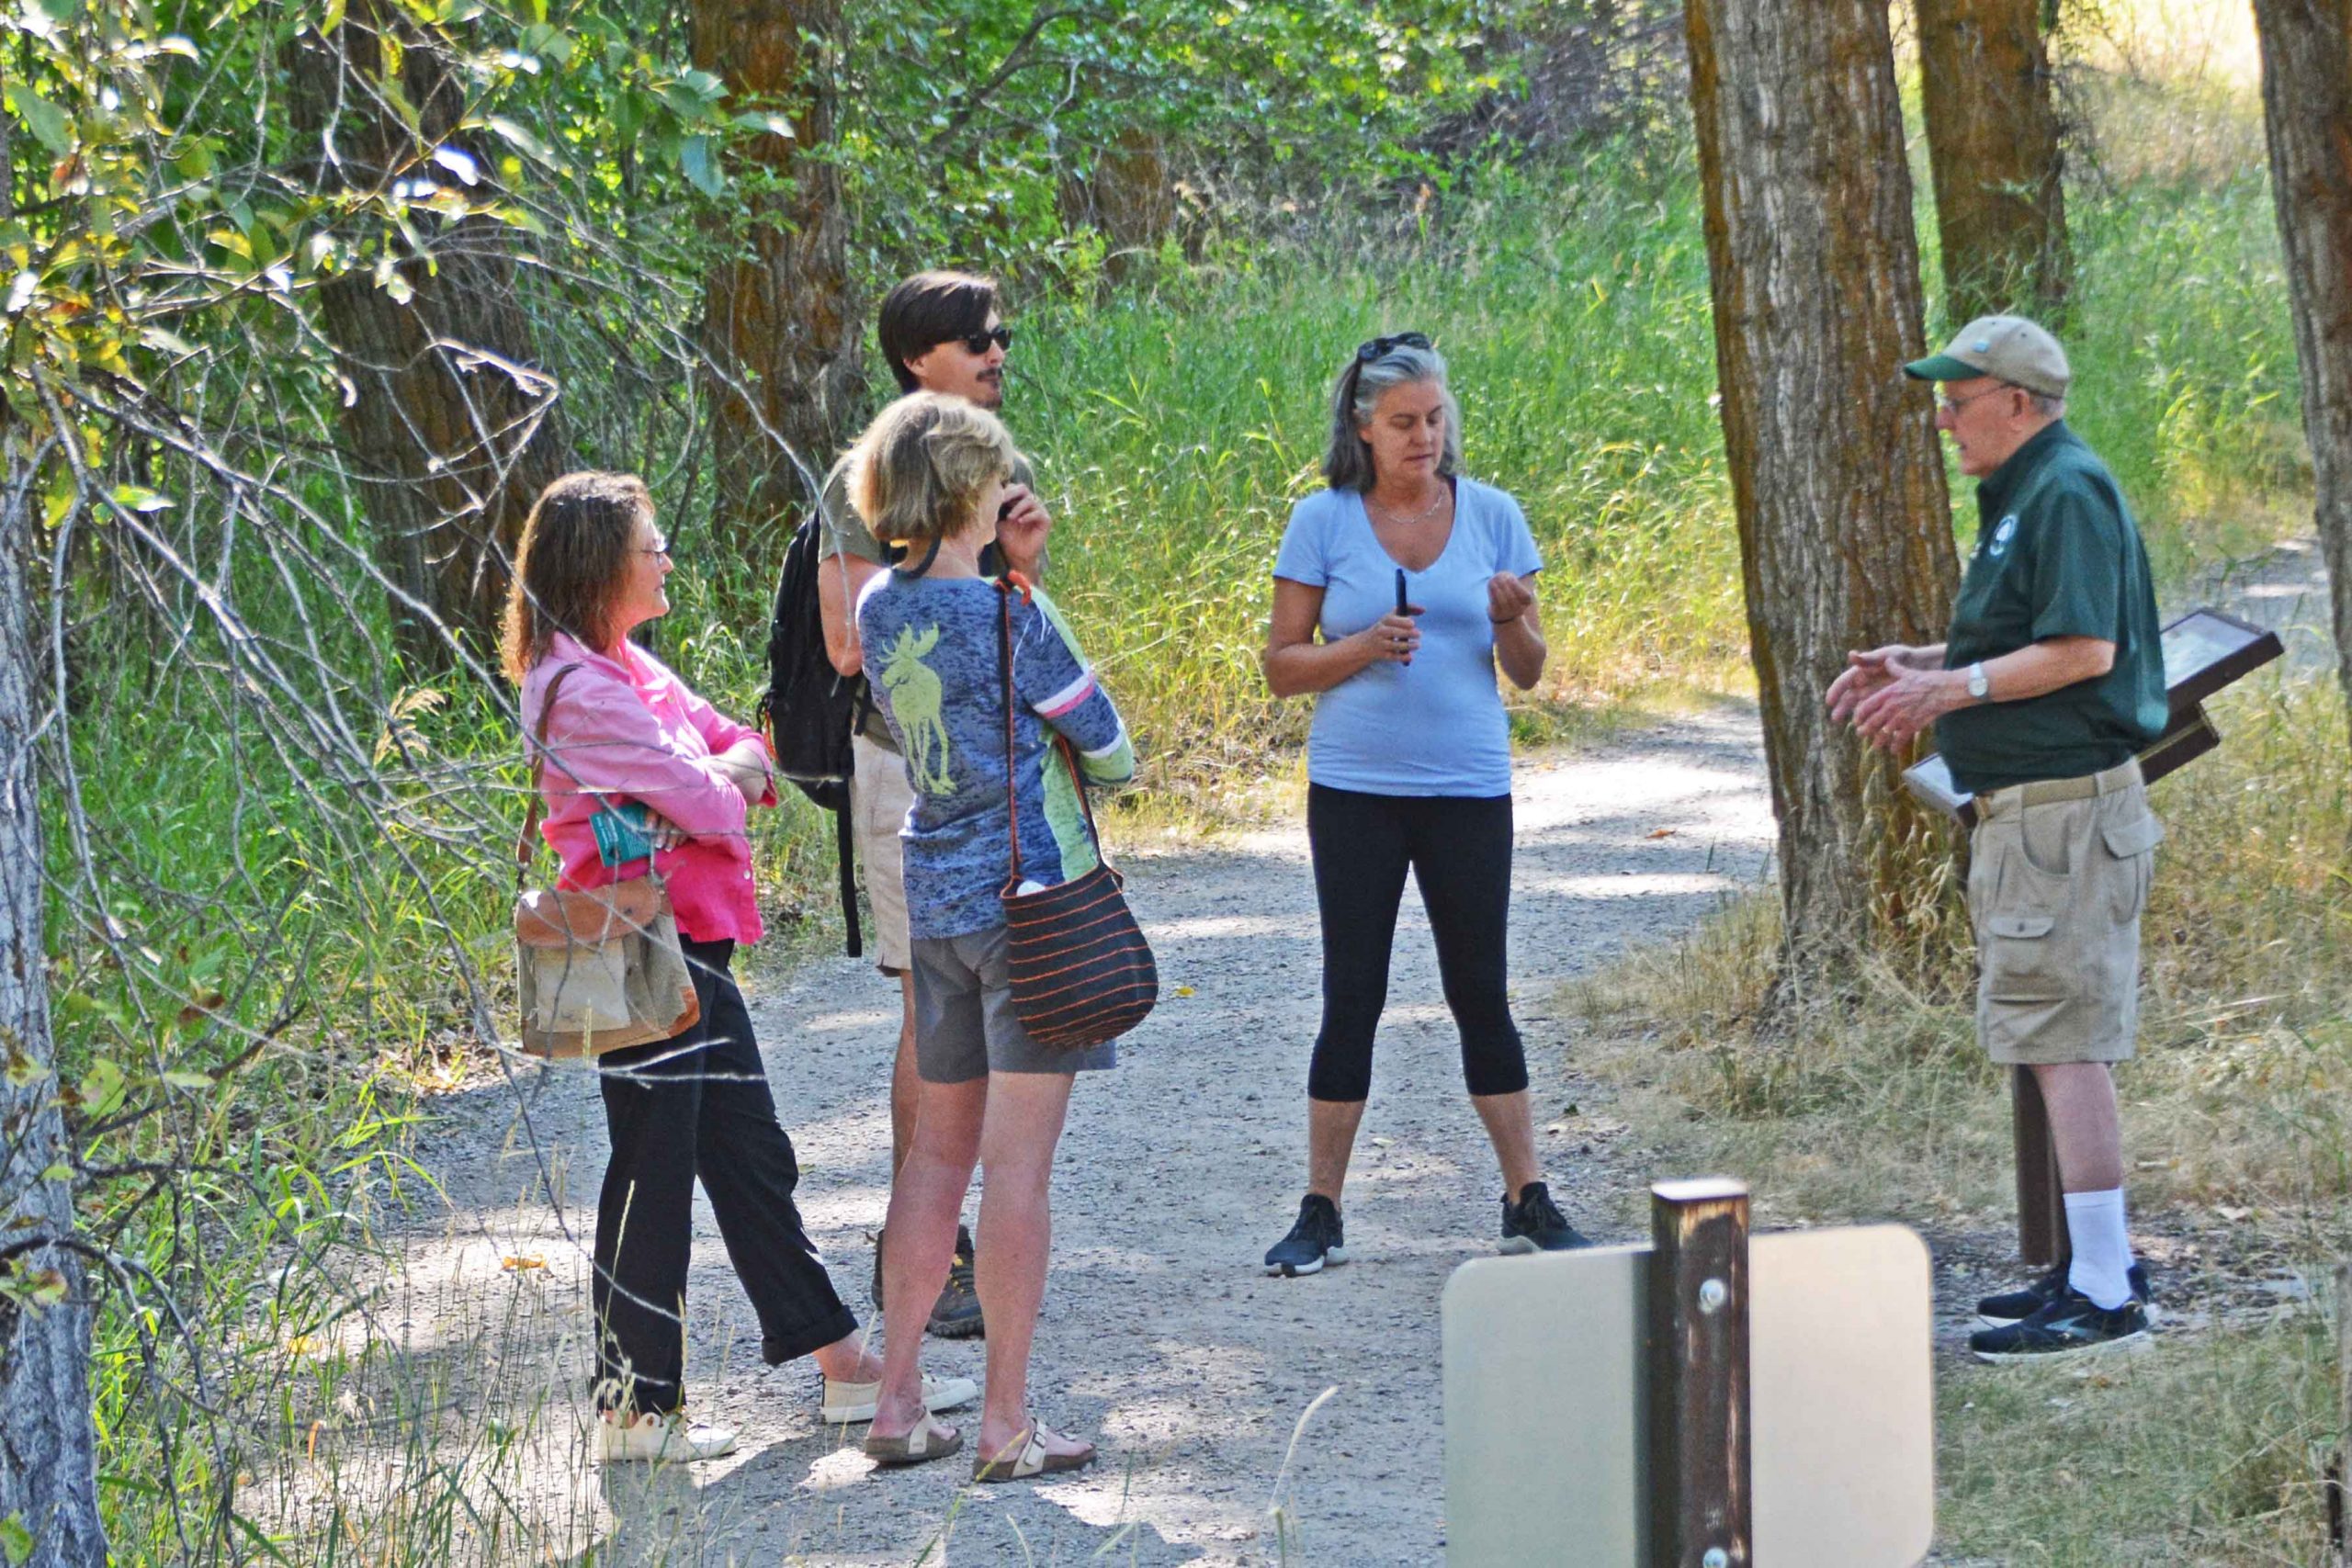 A guide speaks with visitors on a trail at Travelers' Rest State Park.